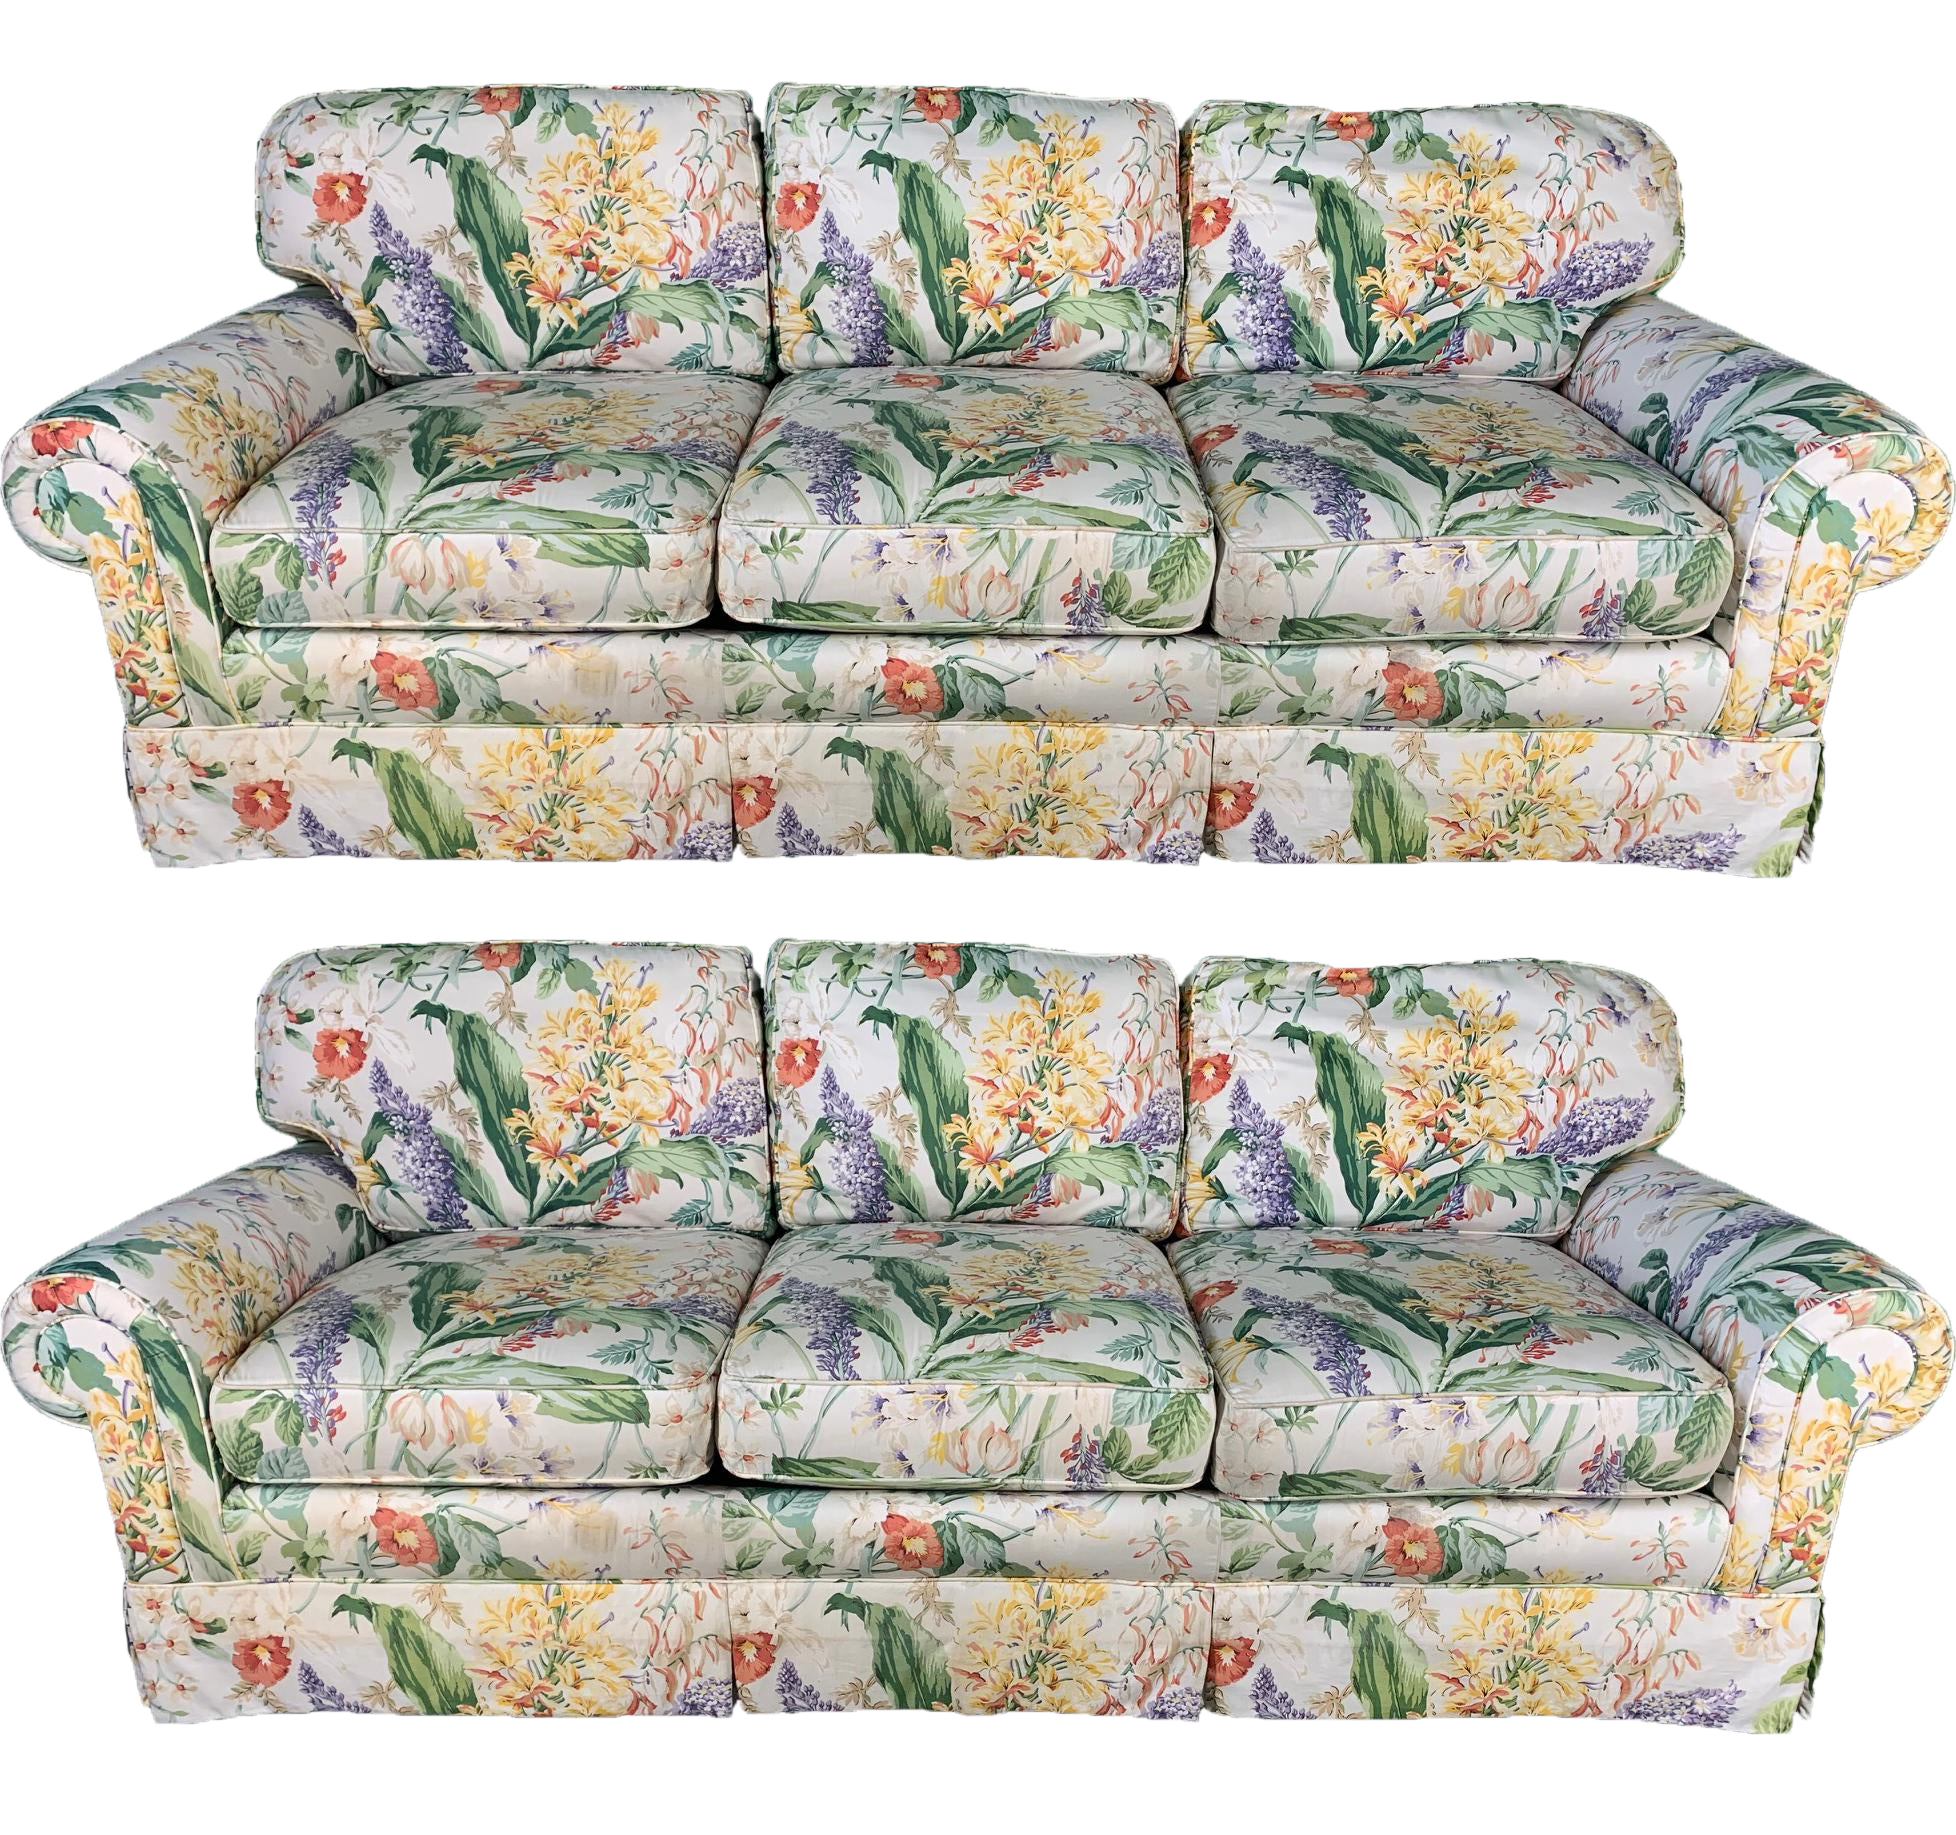 Pair of Floral Upholstered Sofas by Robb and Stucky